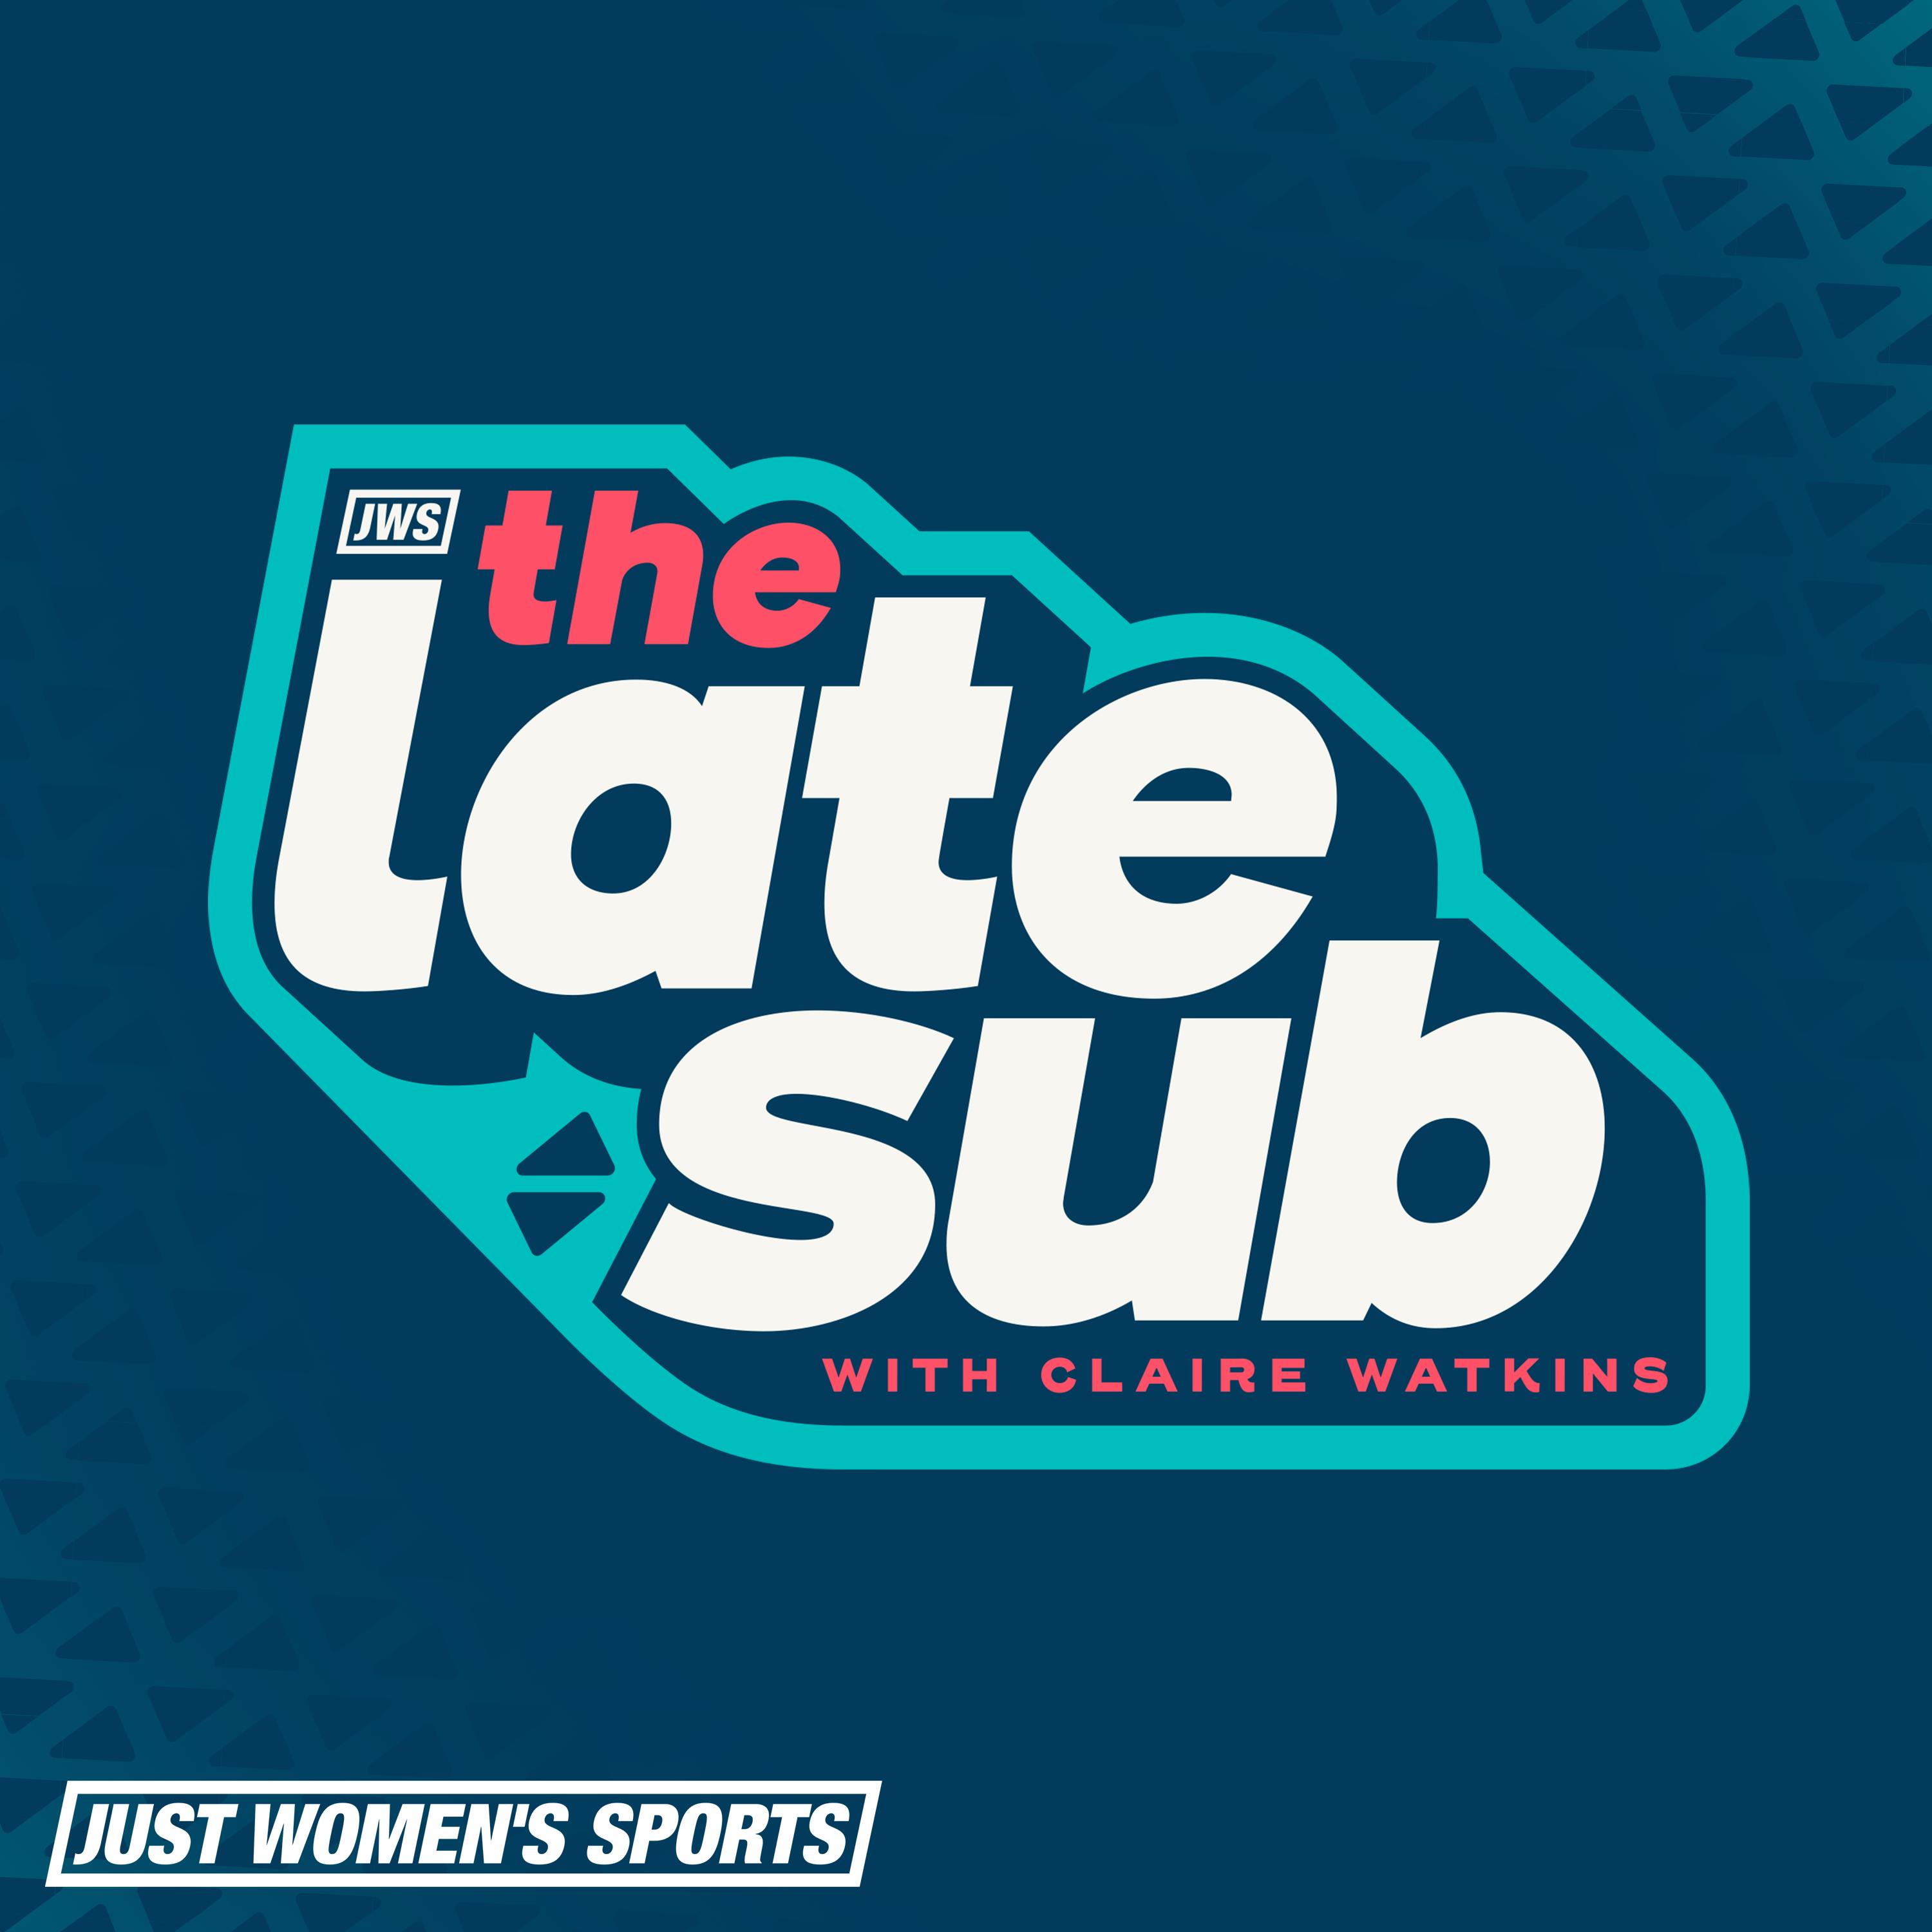 NWSL early storylines and surprises, plus what Caitlin Clark’s Nike deal means for the WNBA